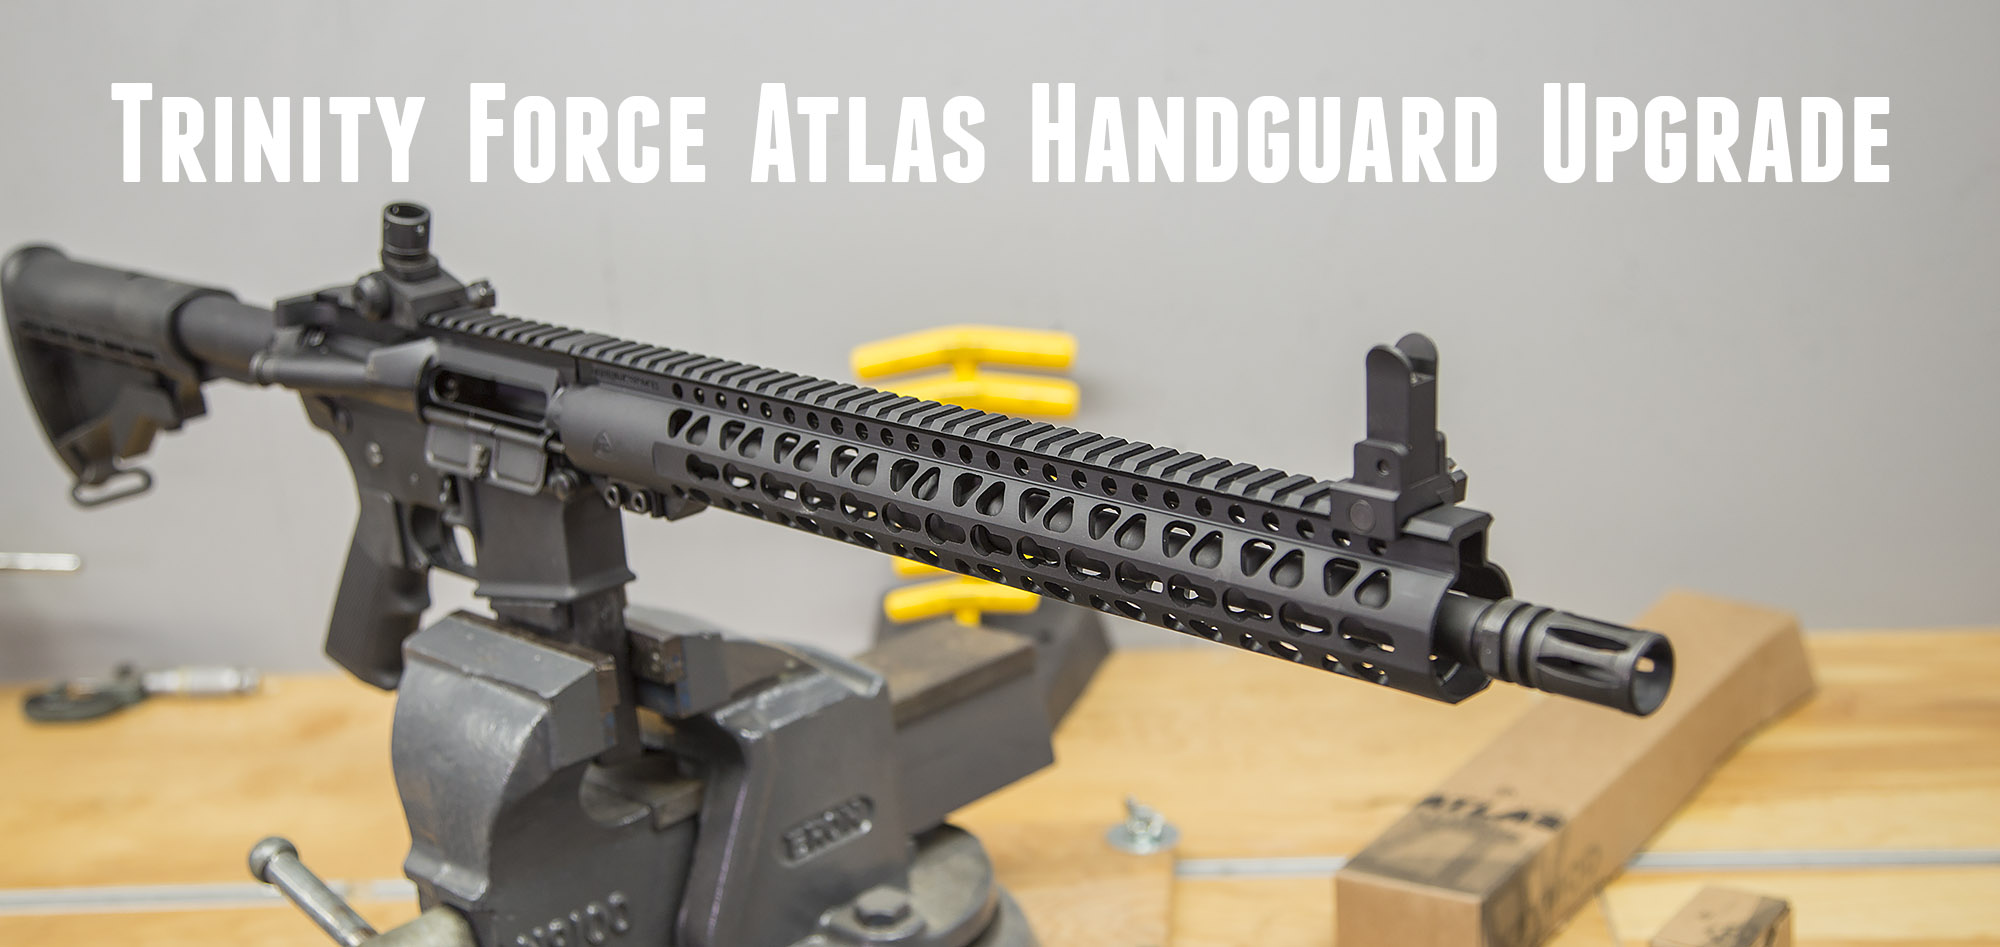 Related image of Ar 15 Handguard Types Free Float.